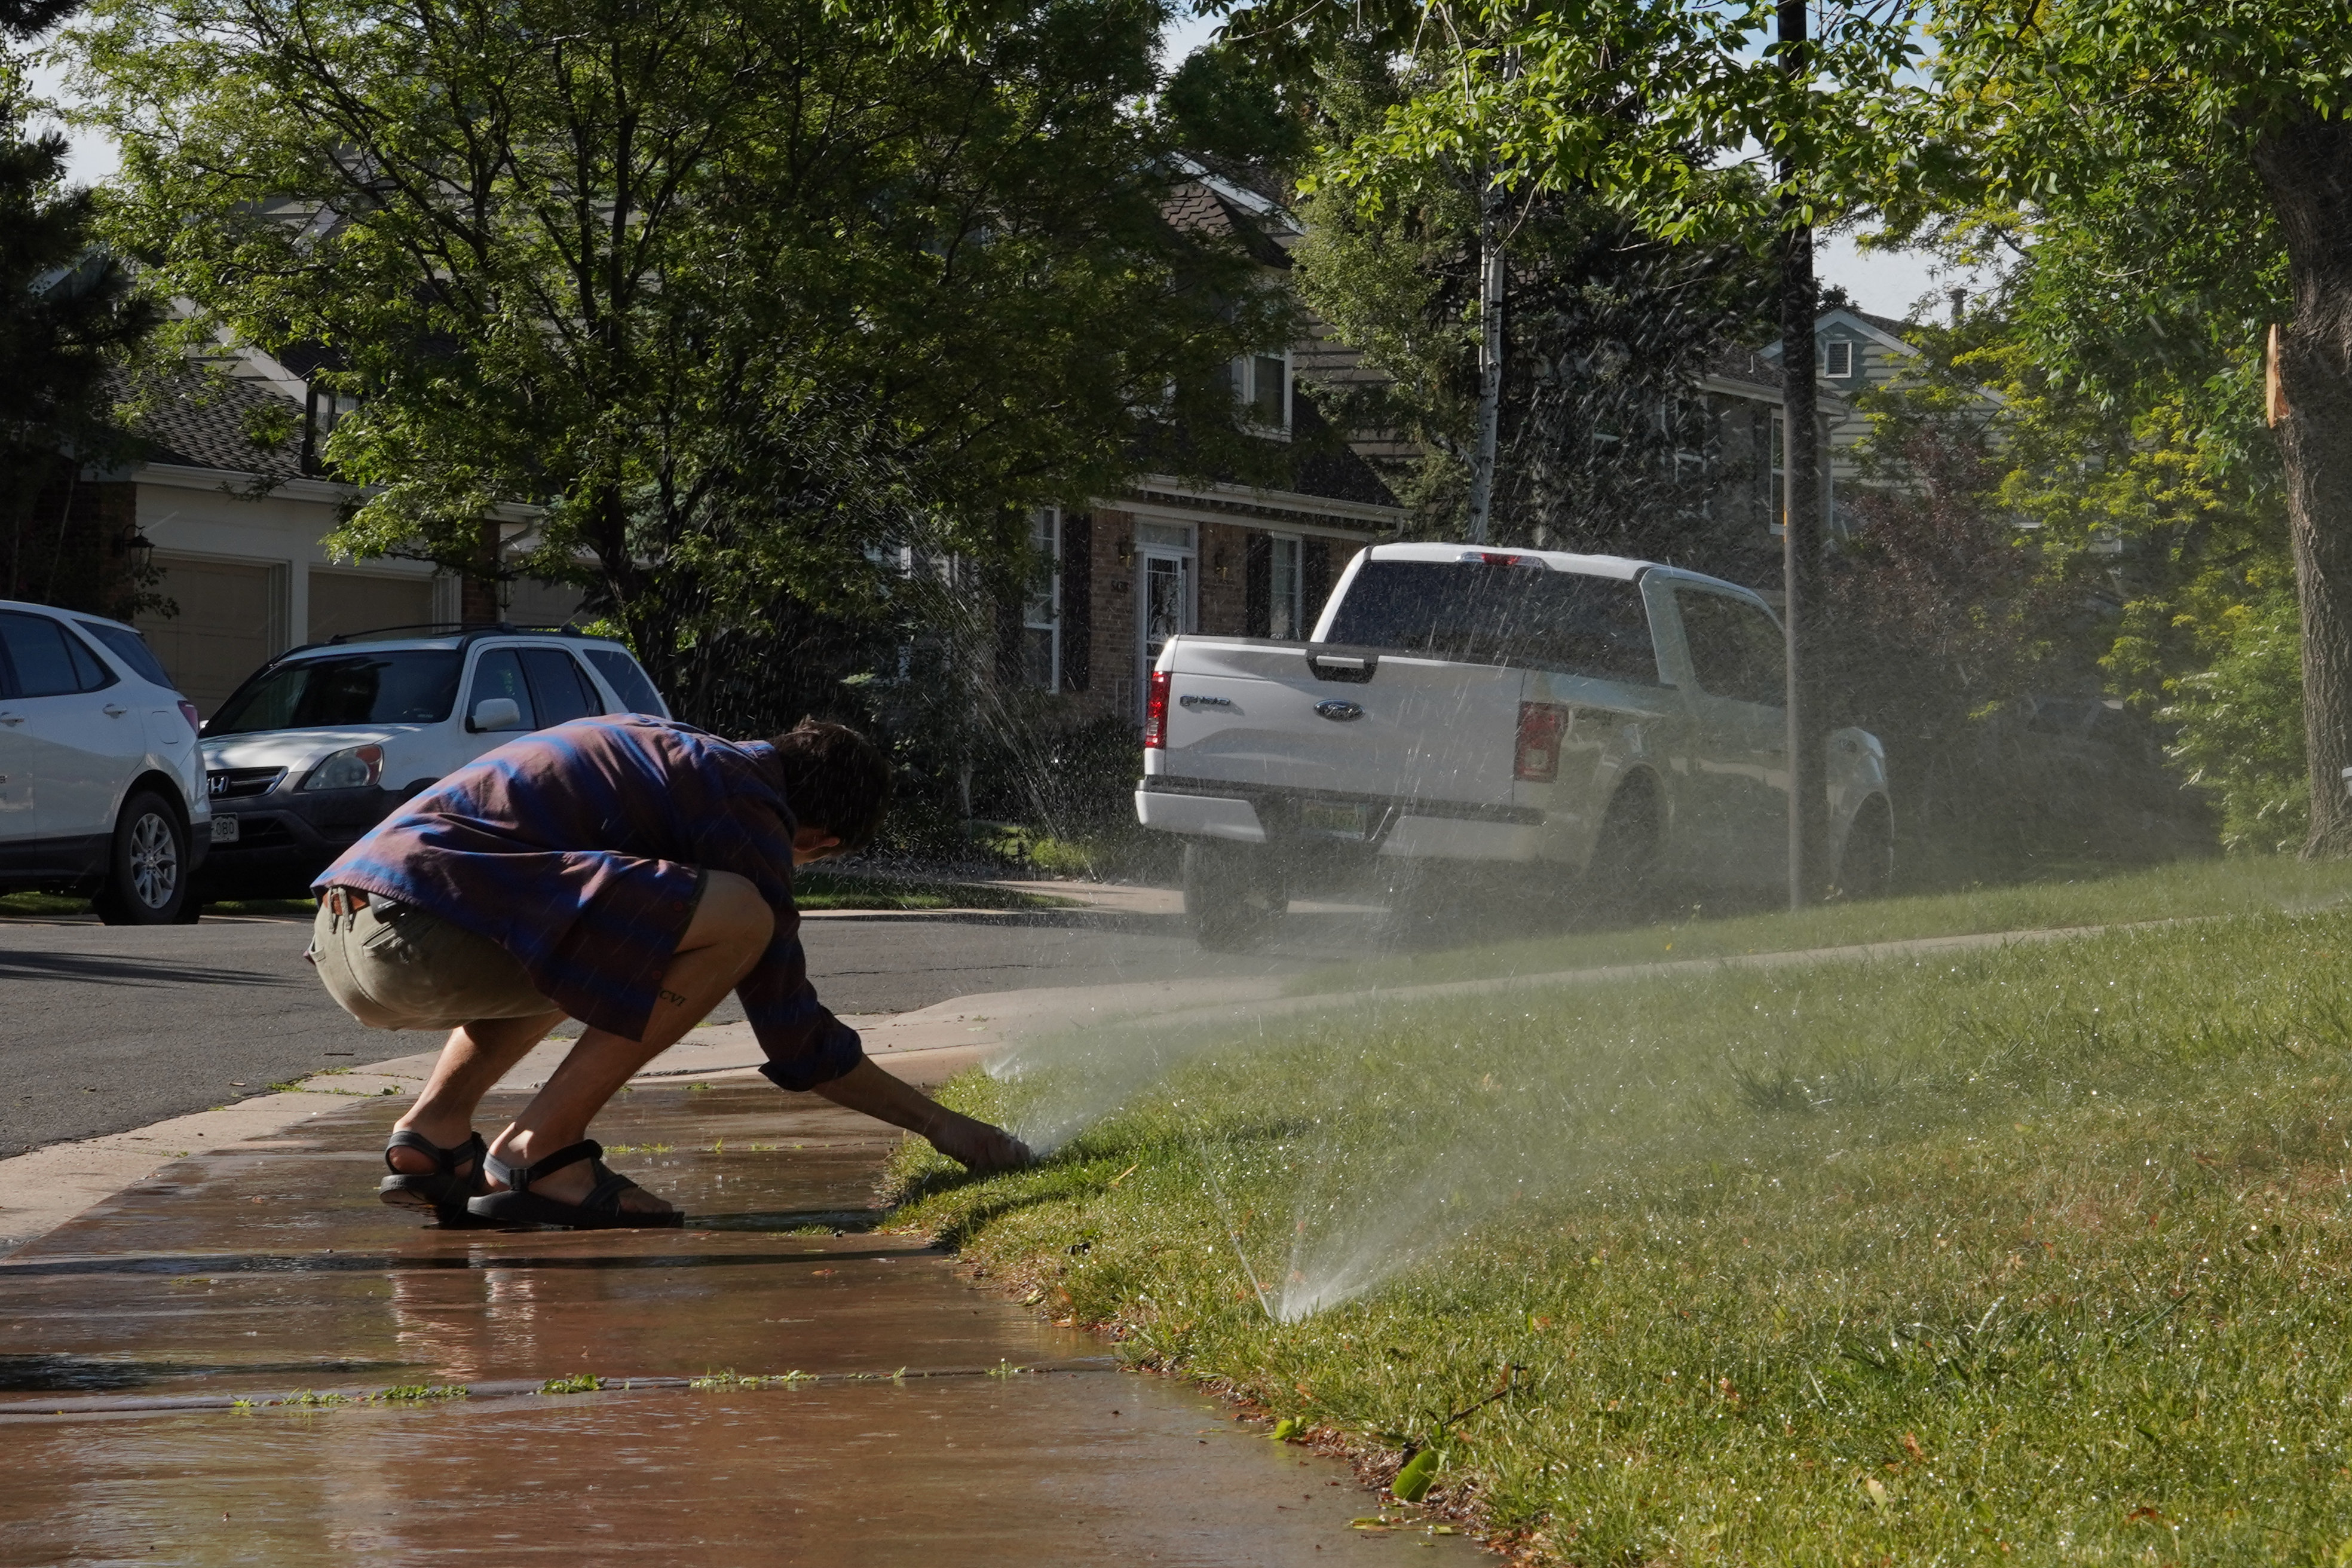 This picture shows a technician adjusting a sprinkler head so that water sprays onto the yard and not the sidewalk.